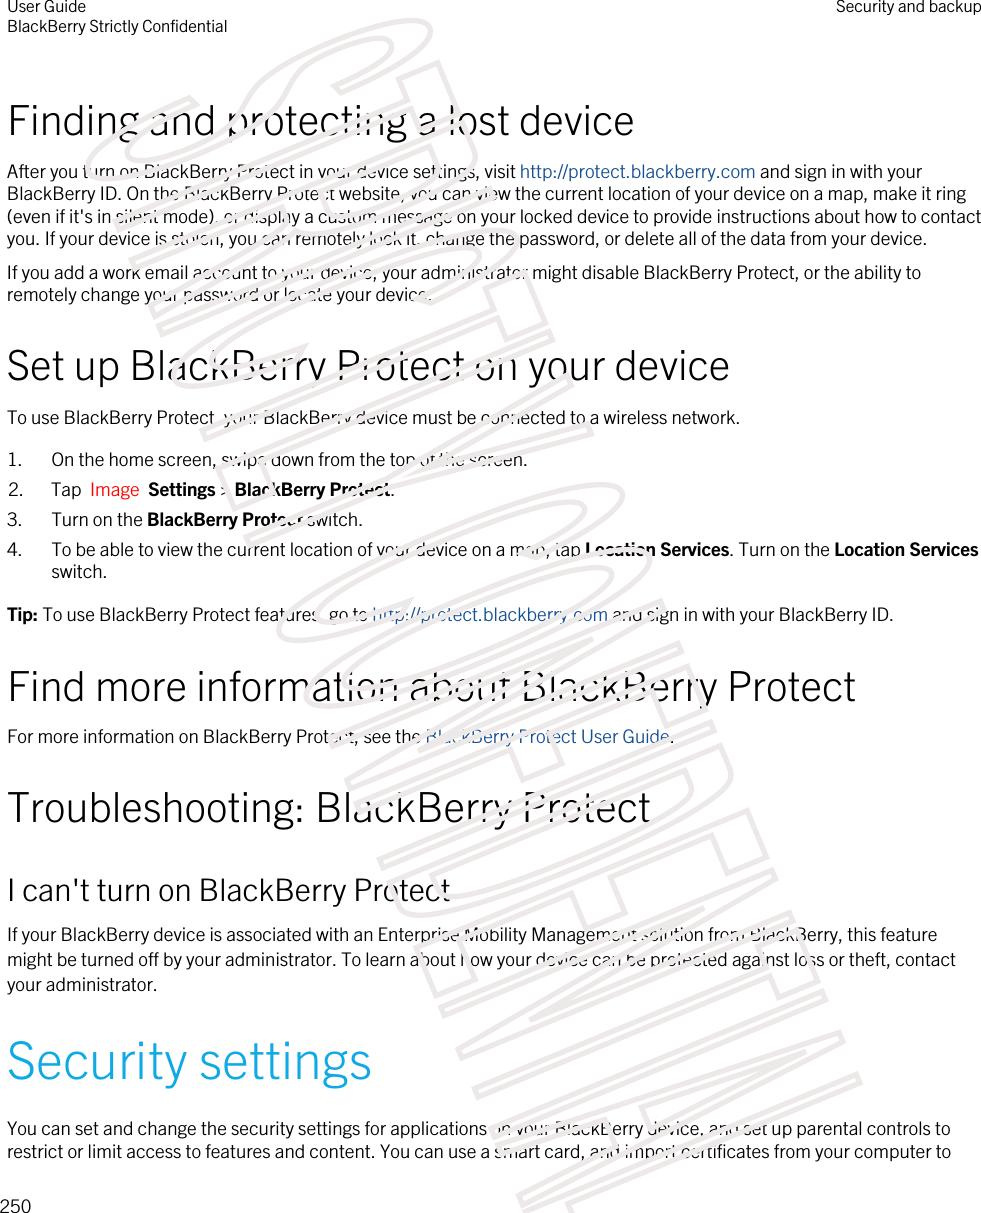 Finding and protecting a lost deviceAfter you turn on BlackBerry Protect in your device settings, visit http://protect.blackberry.com and sign in with your BlackBerry ID. On the BlackBerry Protect website, you can view the current location of your device on a map, make it ring (even if it&apos;s in silent mode), or display a custom message on your locked device to provide instructions about how to contact you. If your device is stolen, you can remotely lock it, change the password, or delete all of the data from your device.If you add a work email account to your device, your administrator might disable BlackBerry Protect, or the ability to remotely change your password or locate your device.Set up BlackBerry Protect on your deviceTo use BlackBerry Protect, your BlackBerry device must be connected to a wireless network.1. On the home screen, swipe down from the top of the screen.2. Tap  Image  Settings &gt; BlackBerry Protect.3. Turn on the BlackBerry Protect switch.4. To be able to view the current location of your device on a map, tap Location Services. Turn on the Location Services switch.Tip: To use BlackBerry Protect features, go to http://protect.blackberry.com and sign in with your BlackBerry ID.Find more information about BlackBerry ProtectFor more information on BlackBerry Protect, see the BlackBerry Protect User Guide.Troubleshooting: BlackBerry ProtectI can&apos;t turn on BlackBerry ProtectIf your BlackBerry device is associated with an Enterprise Mobility Management solution from BlackBerry, this feature might be turned off by your administrator. To learn about how your device can be protected against loss or theft, contact your administrator.Security settingsYou can set and change the security settings for applications on your BlackBerry device, and set up parental controls to restrict or limit access to features and content. You can use a smart card, and import certificates from your computer to User GuideBlackBerry Strictly Confidential Security and backup250STRICTLY CONFIDENTIAL